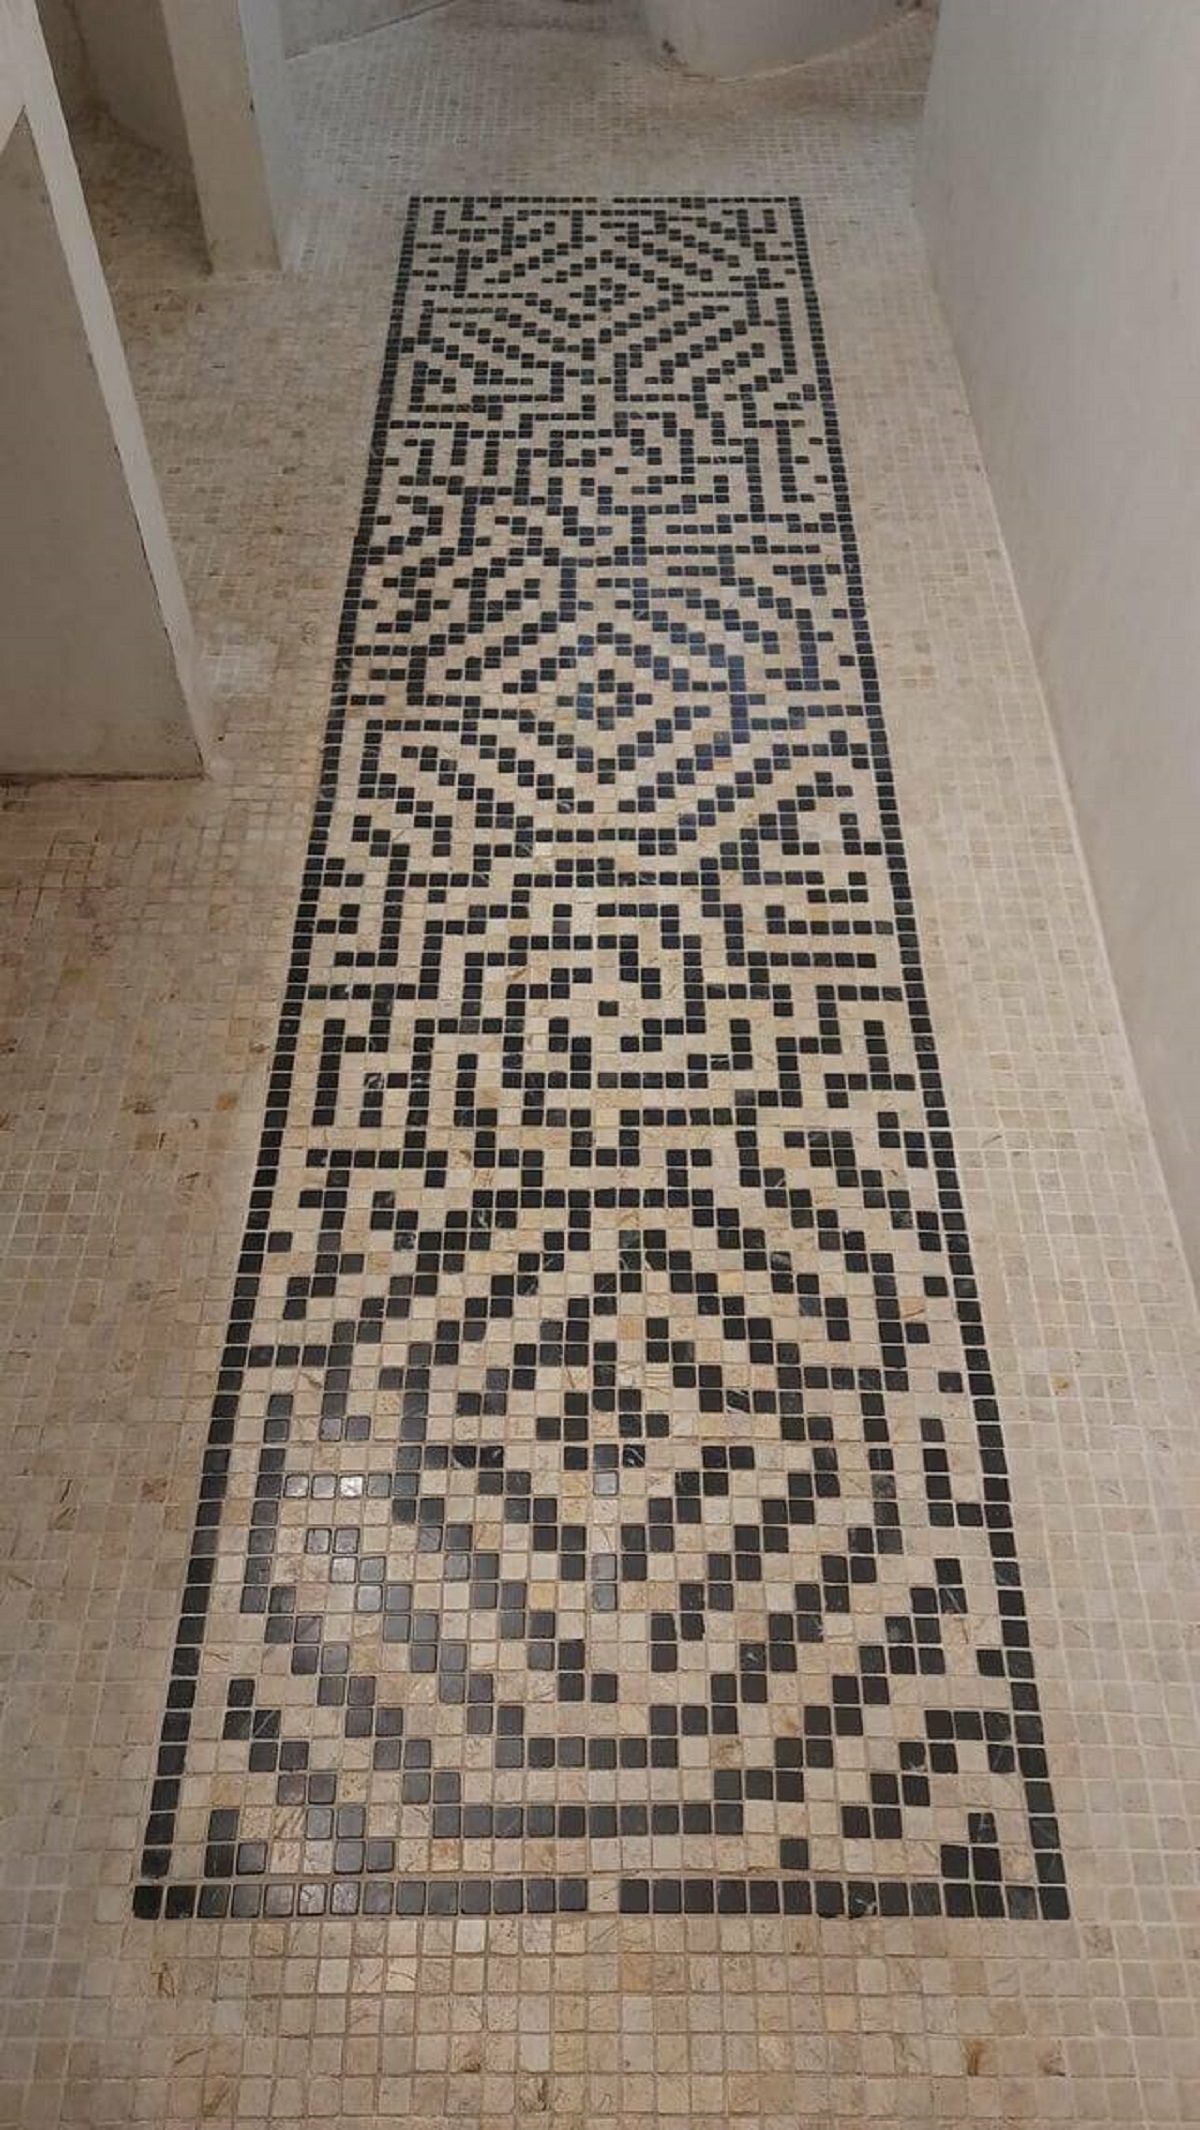 "The villa I stayed in had a solvable maze on the bathroom floor"